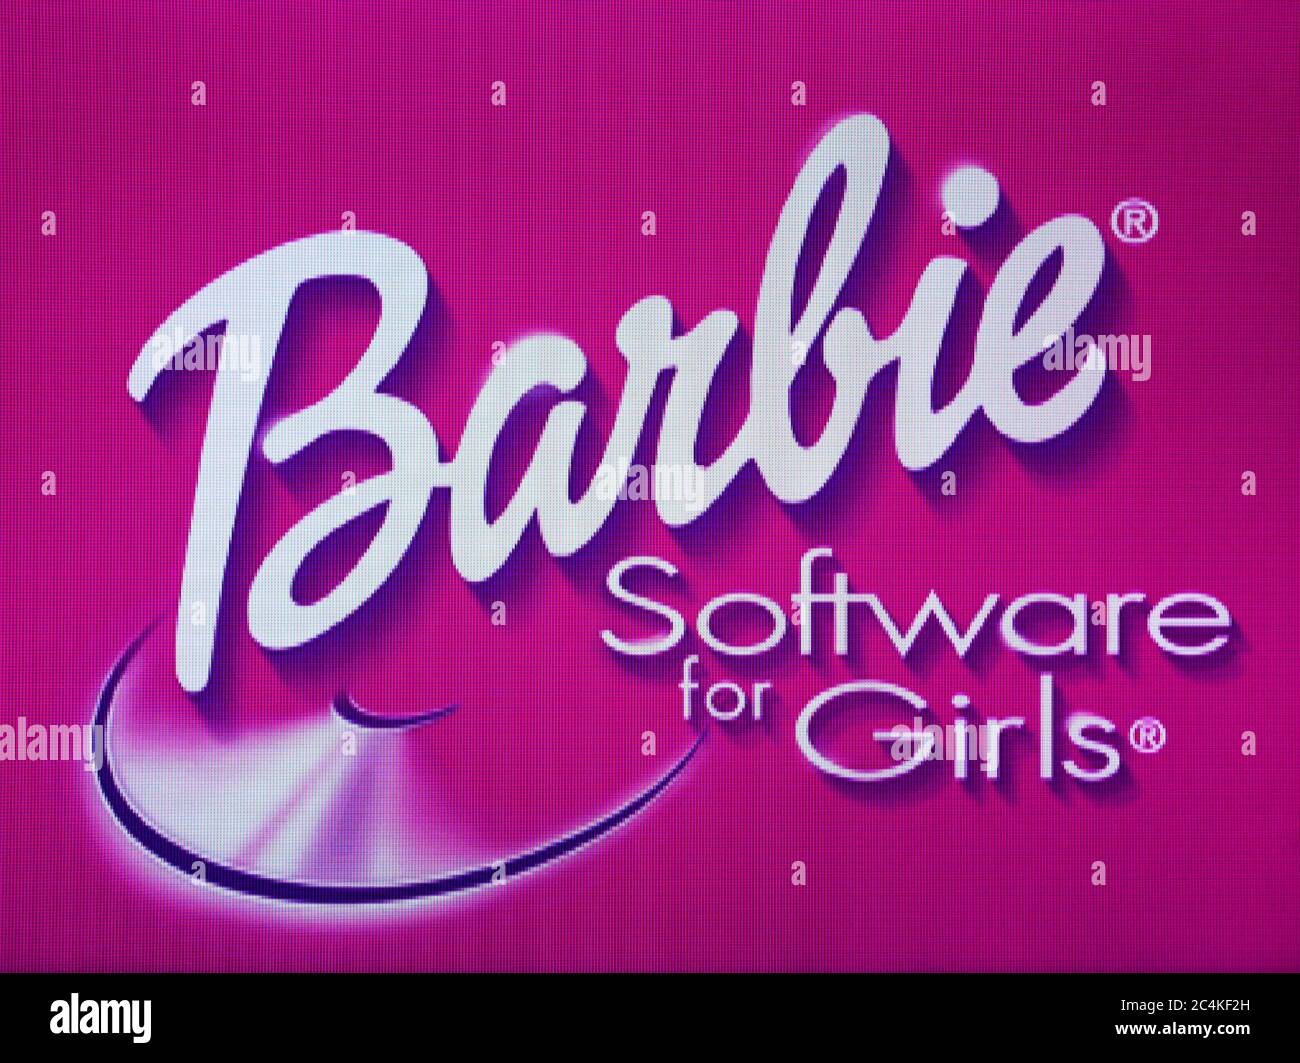 Barbie Logo Images – Browse 499 Stock Photos, Vectors, and Video